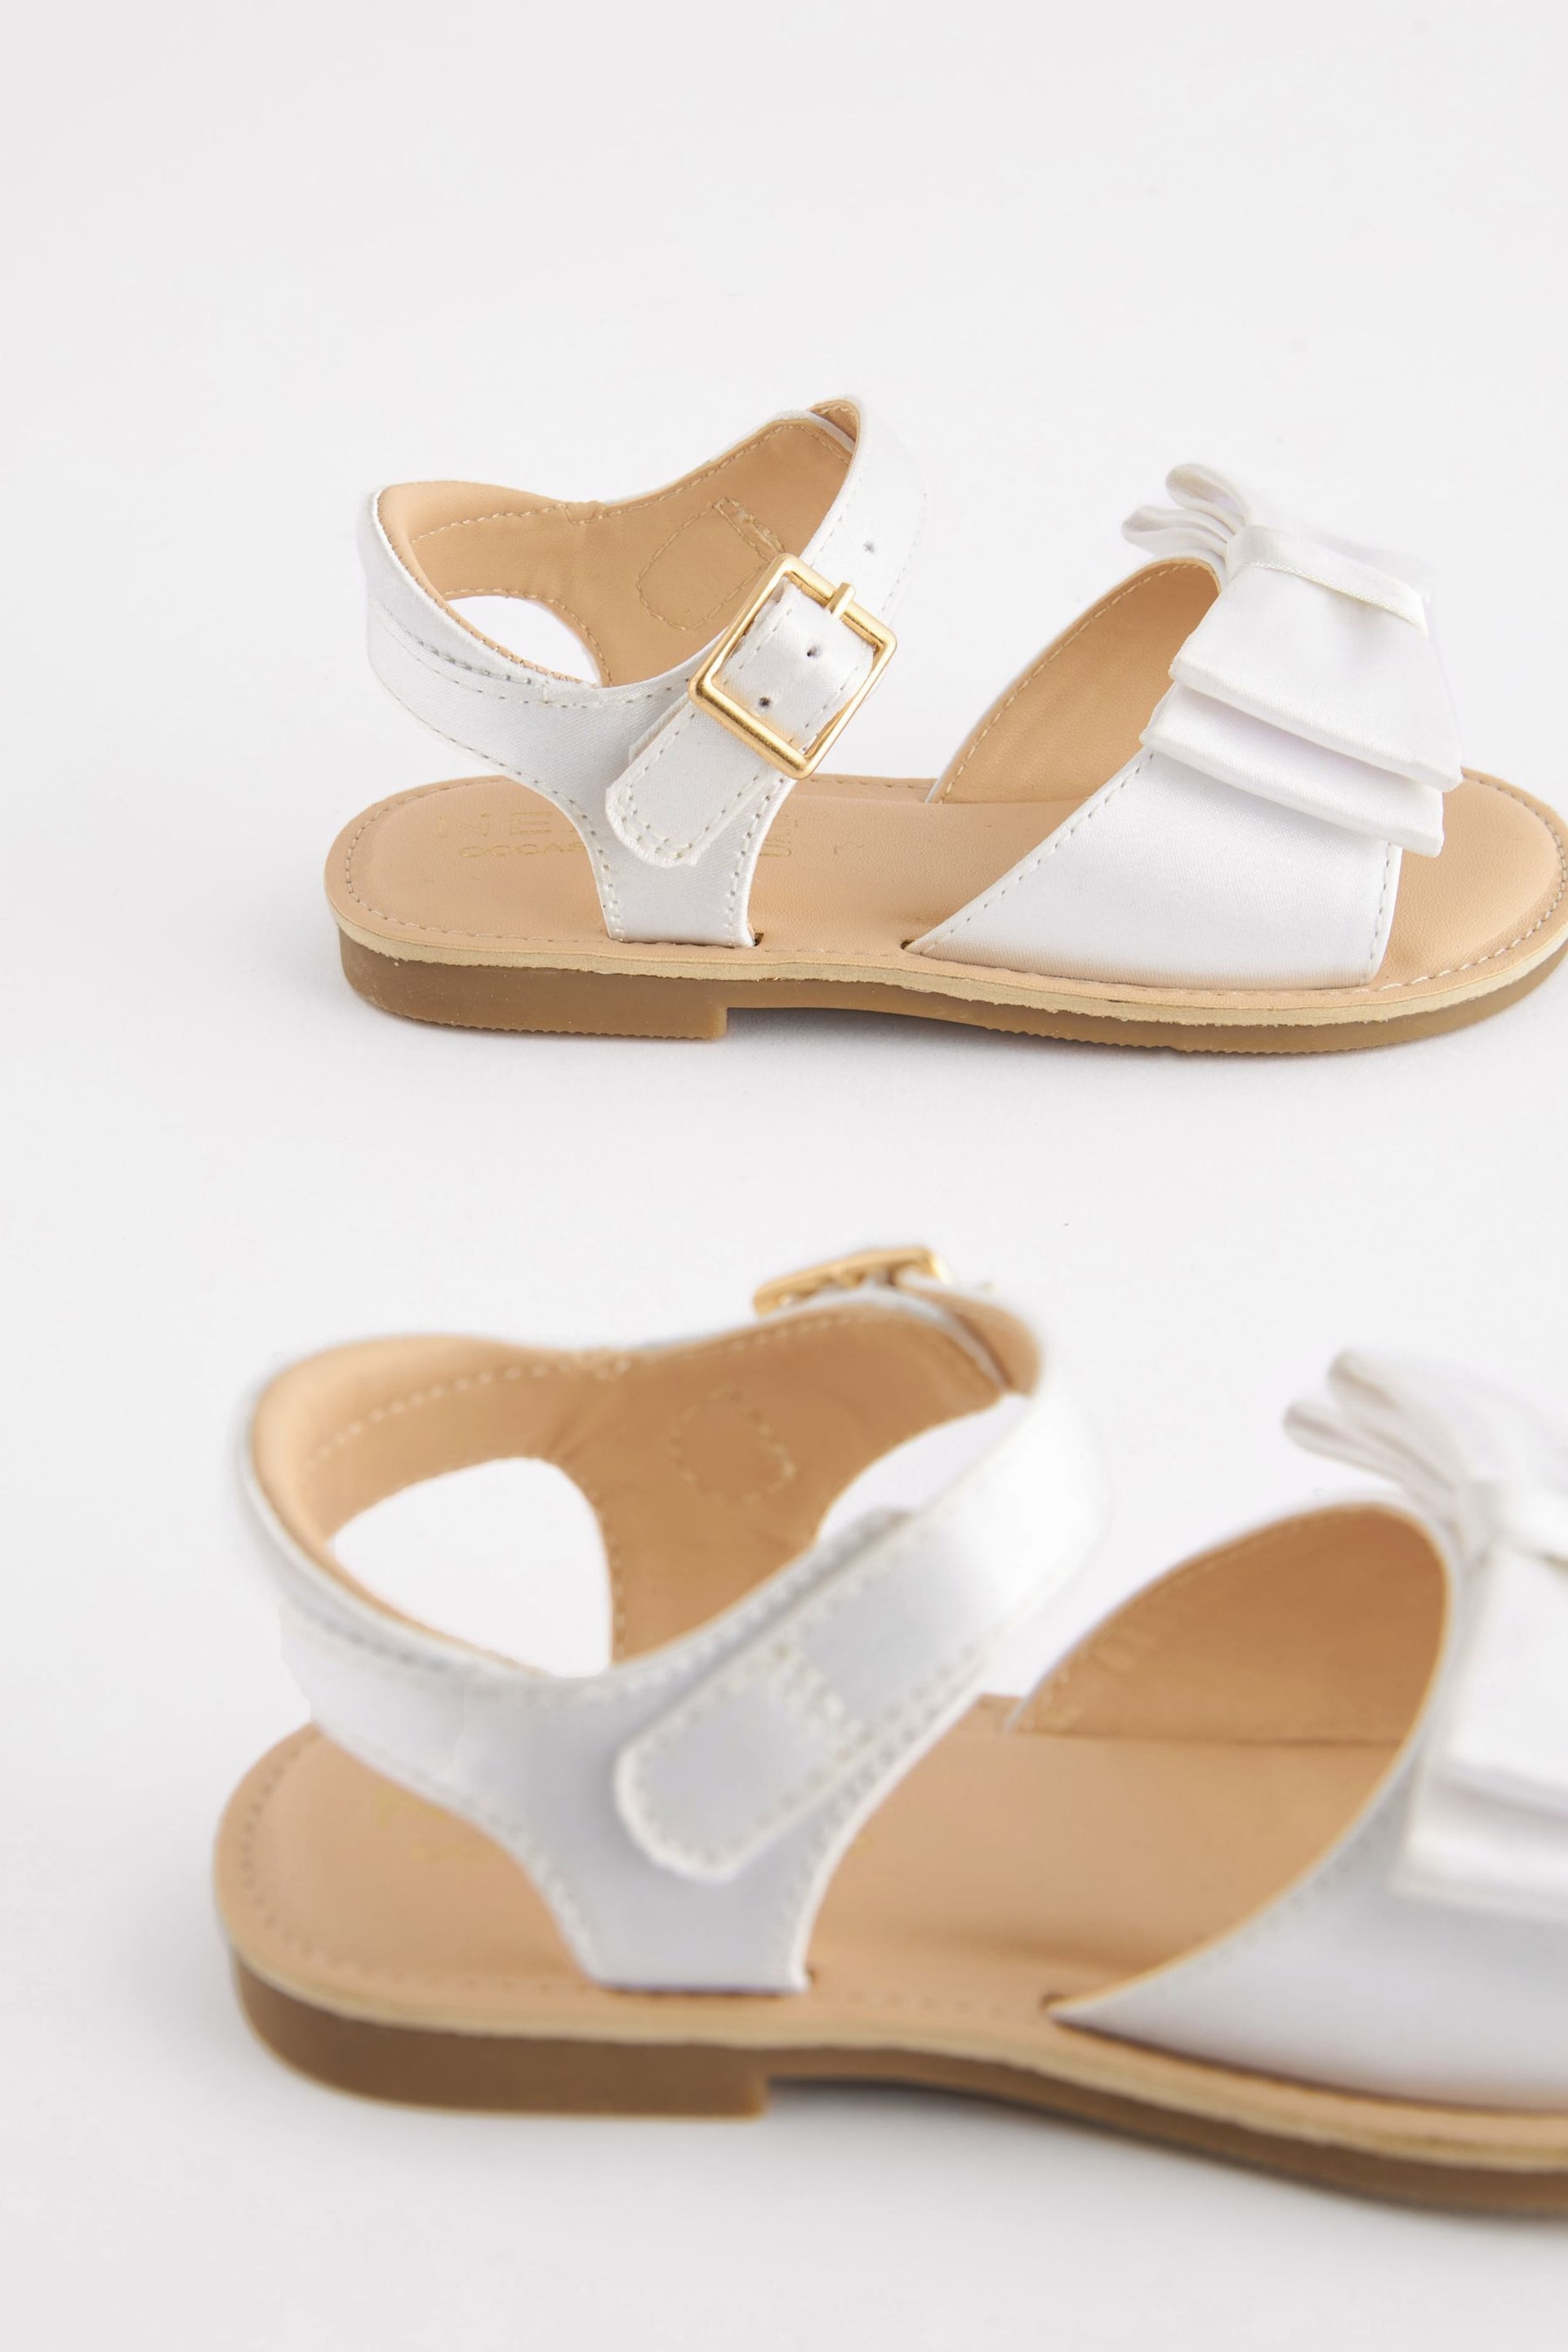 White Wide Fit (G) Satin Bridesmaid Bow Sandals - Image 10 of 10